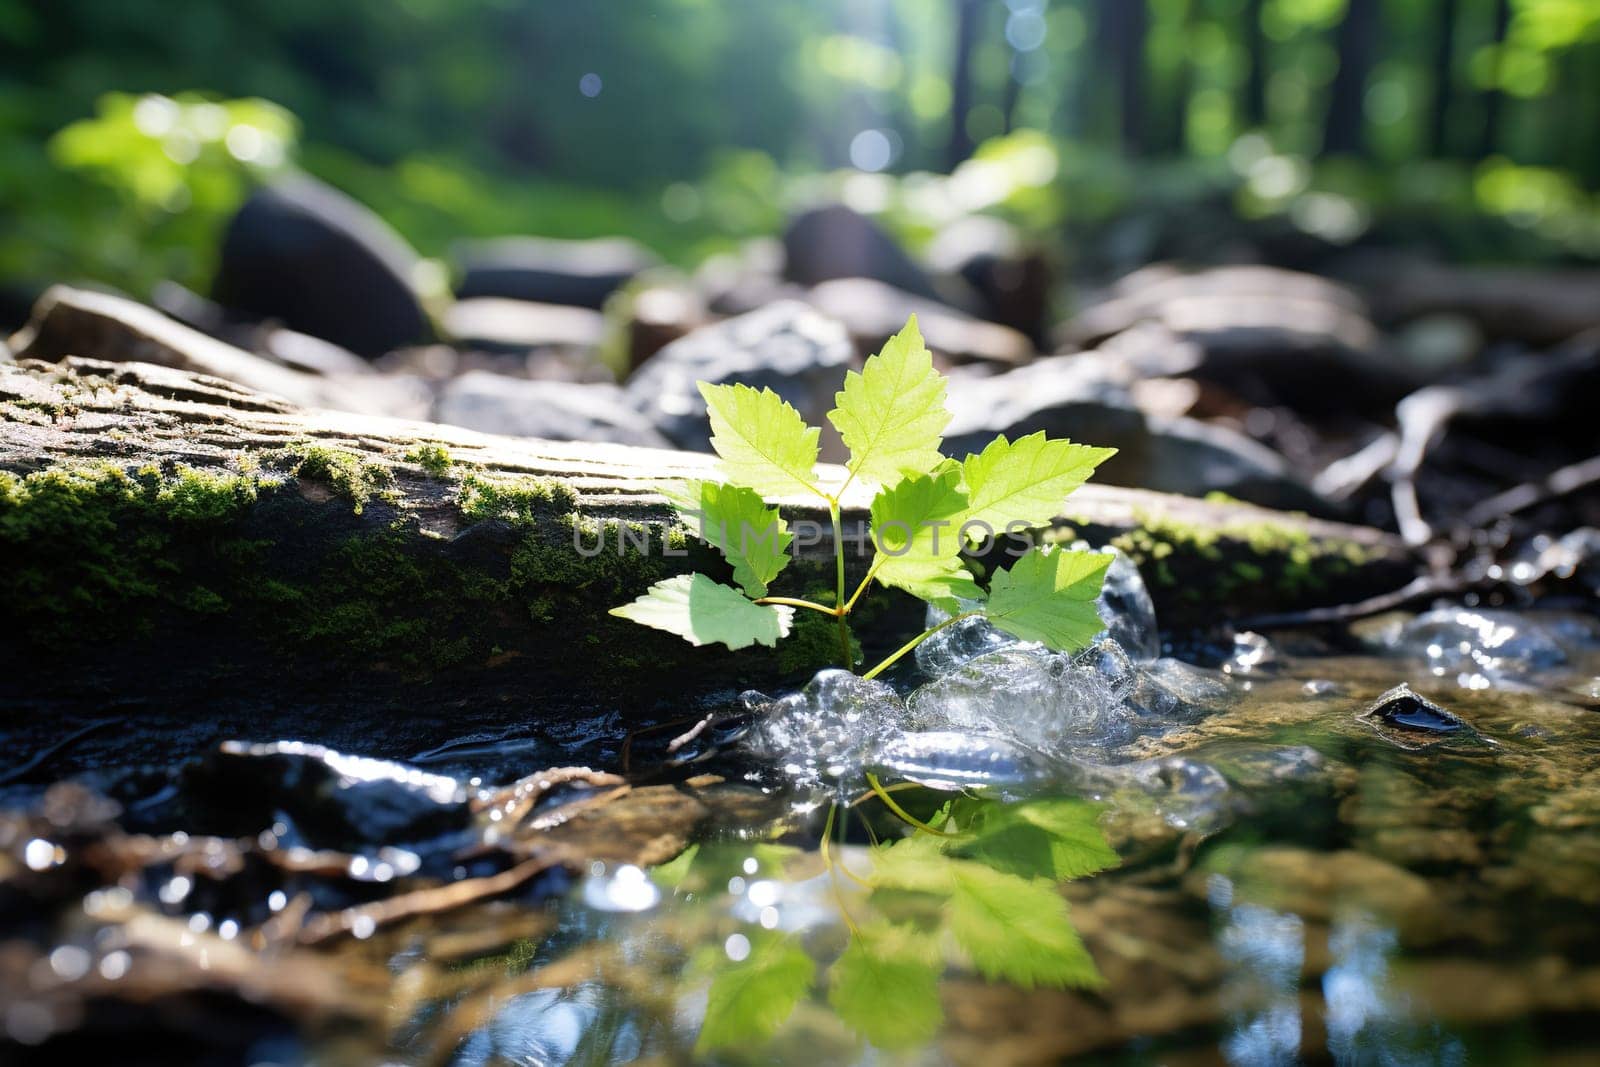 Calm forest river with large stones, tree leaves and moss. Blurred forest background